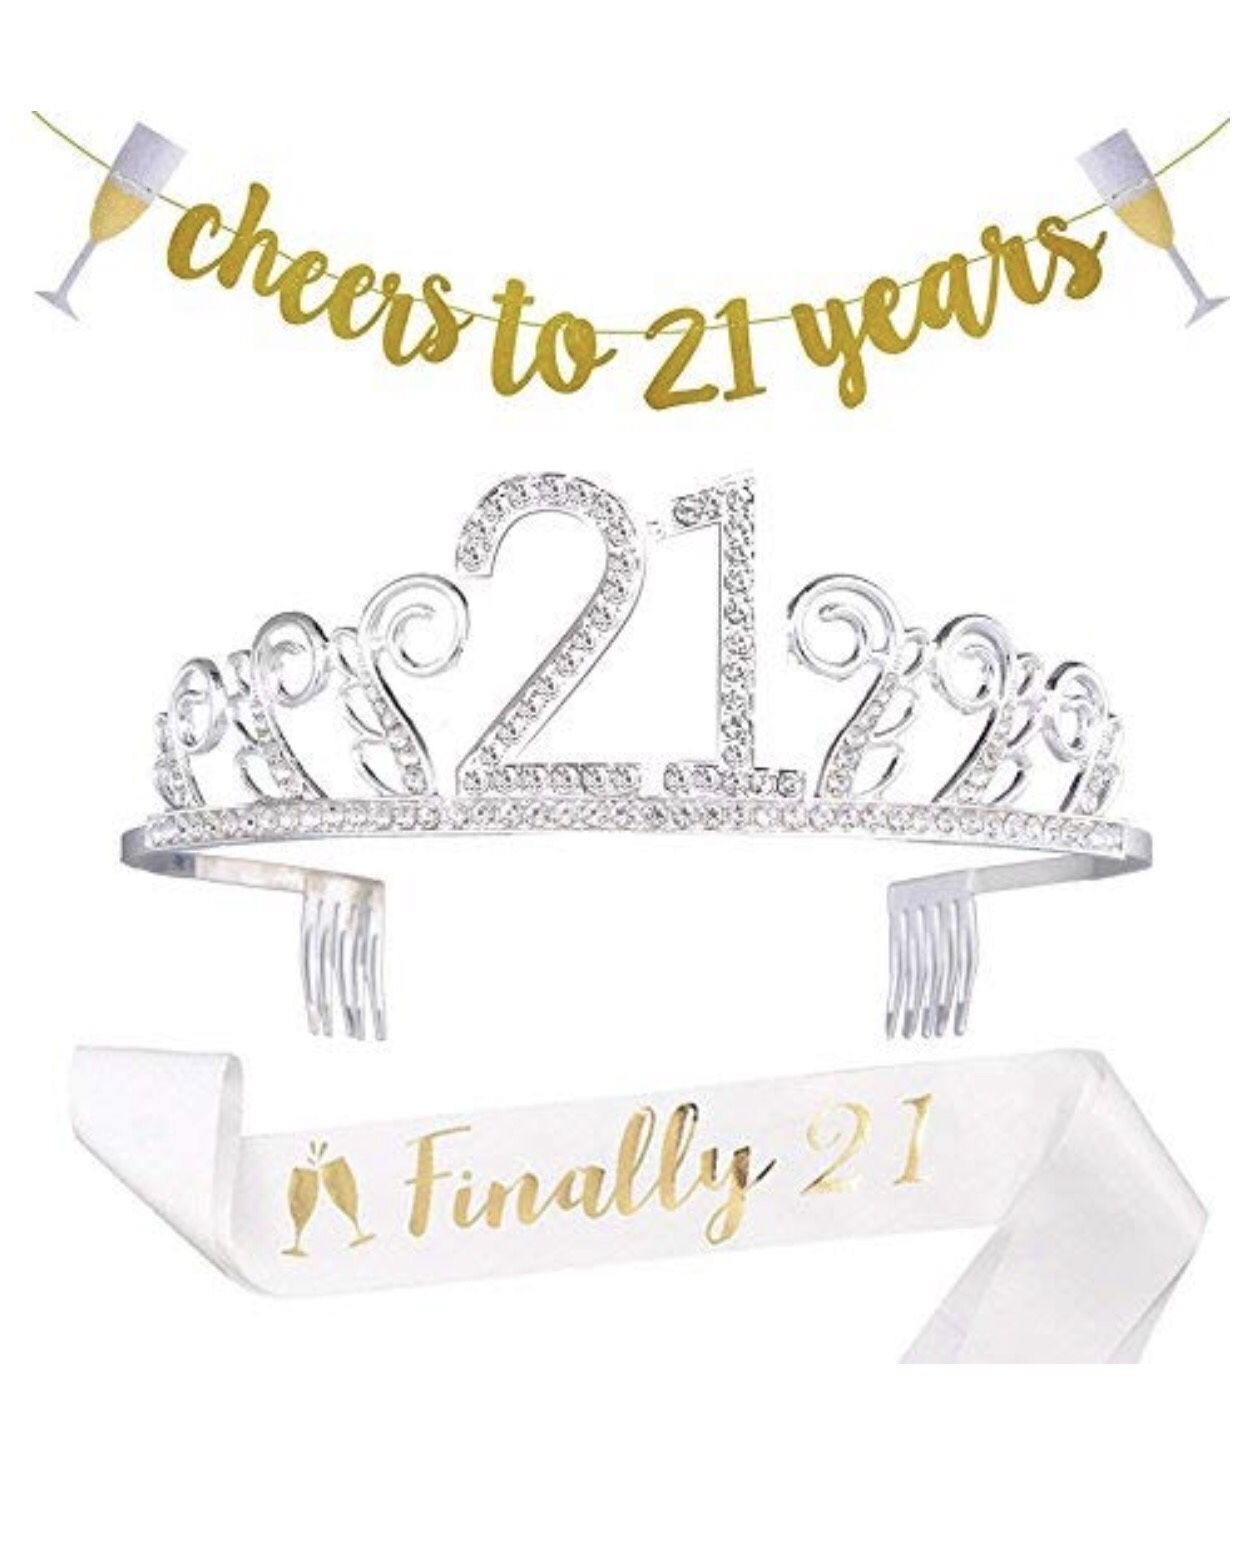 21st Birthday Decorations Party Supplies - 21st Birthday Gifts for her,21 Birthday sash | Banner | Crown | Cake Topper. (21)